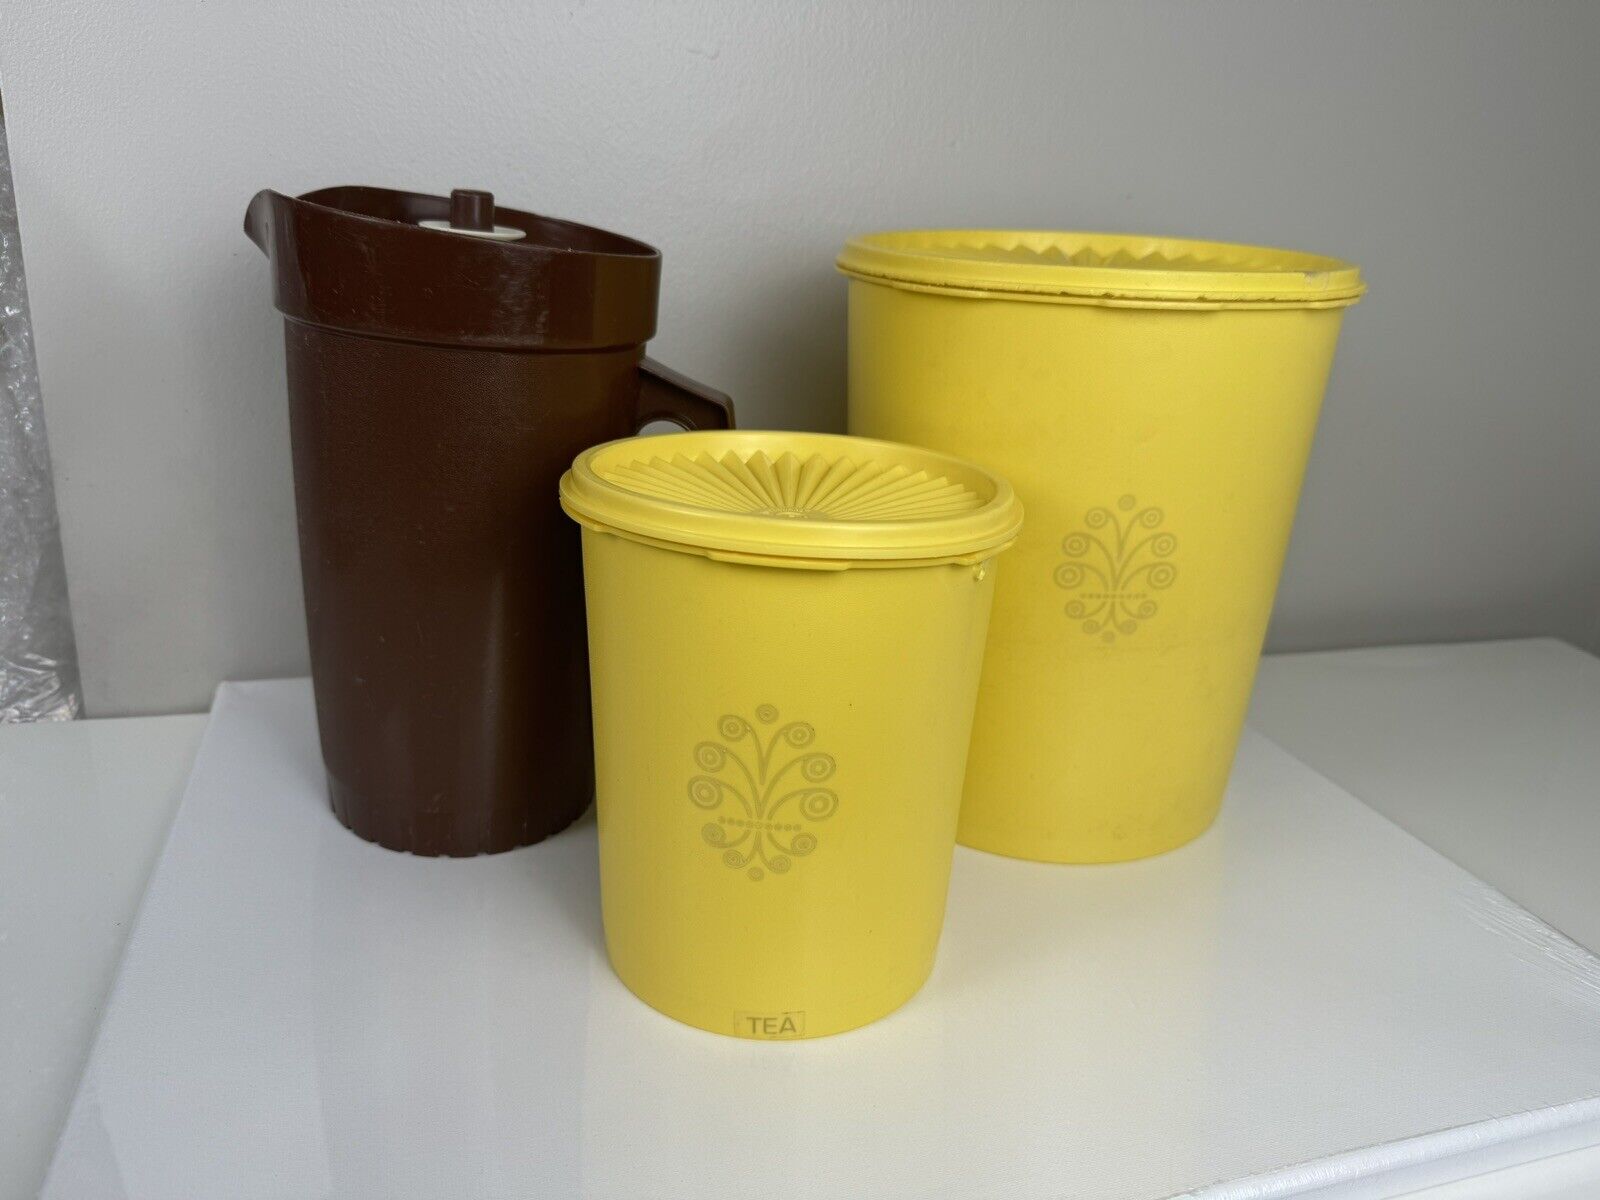 Vintage Tupperware Yellow Canisters & Brown Pitcher  800-6 Push Button Lid